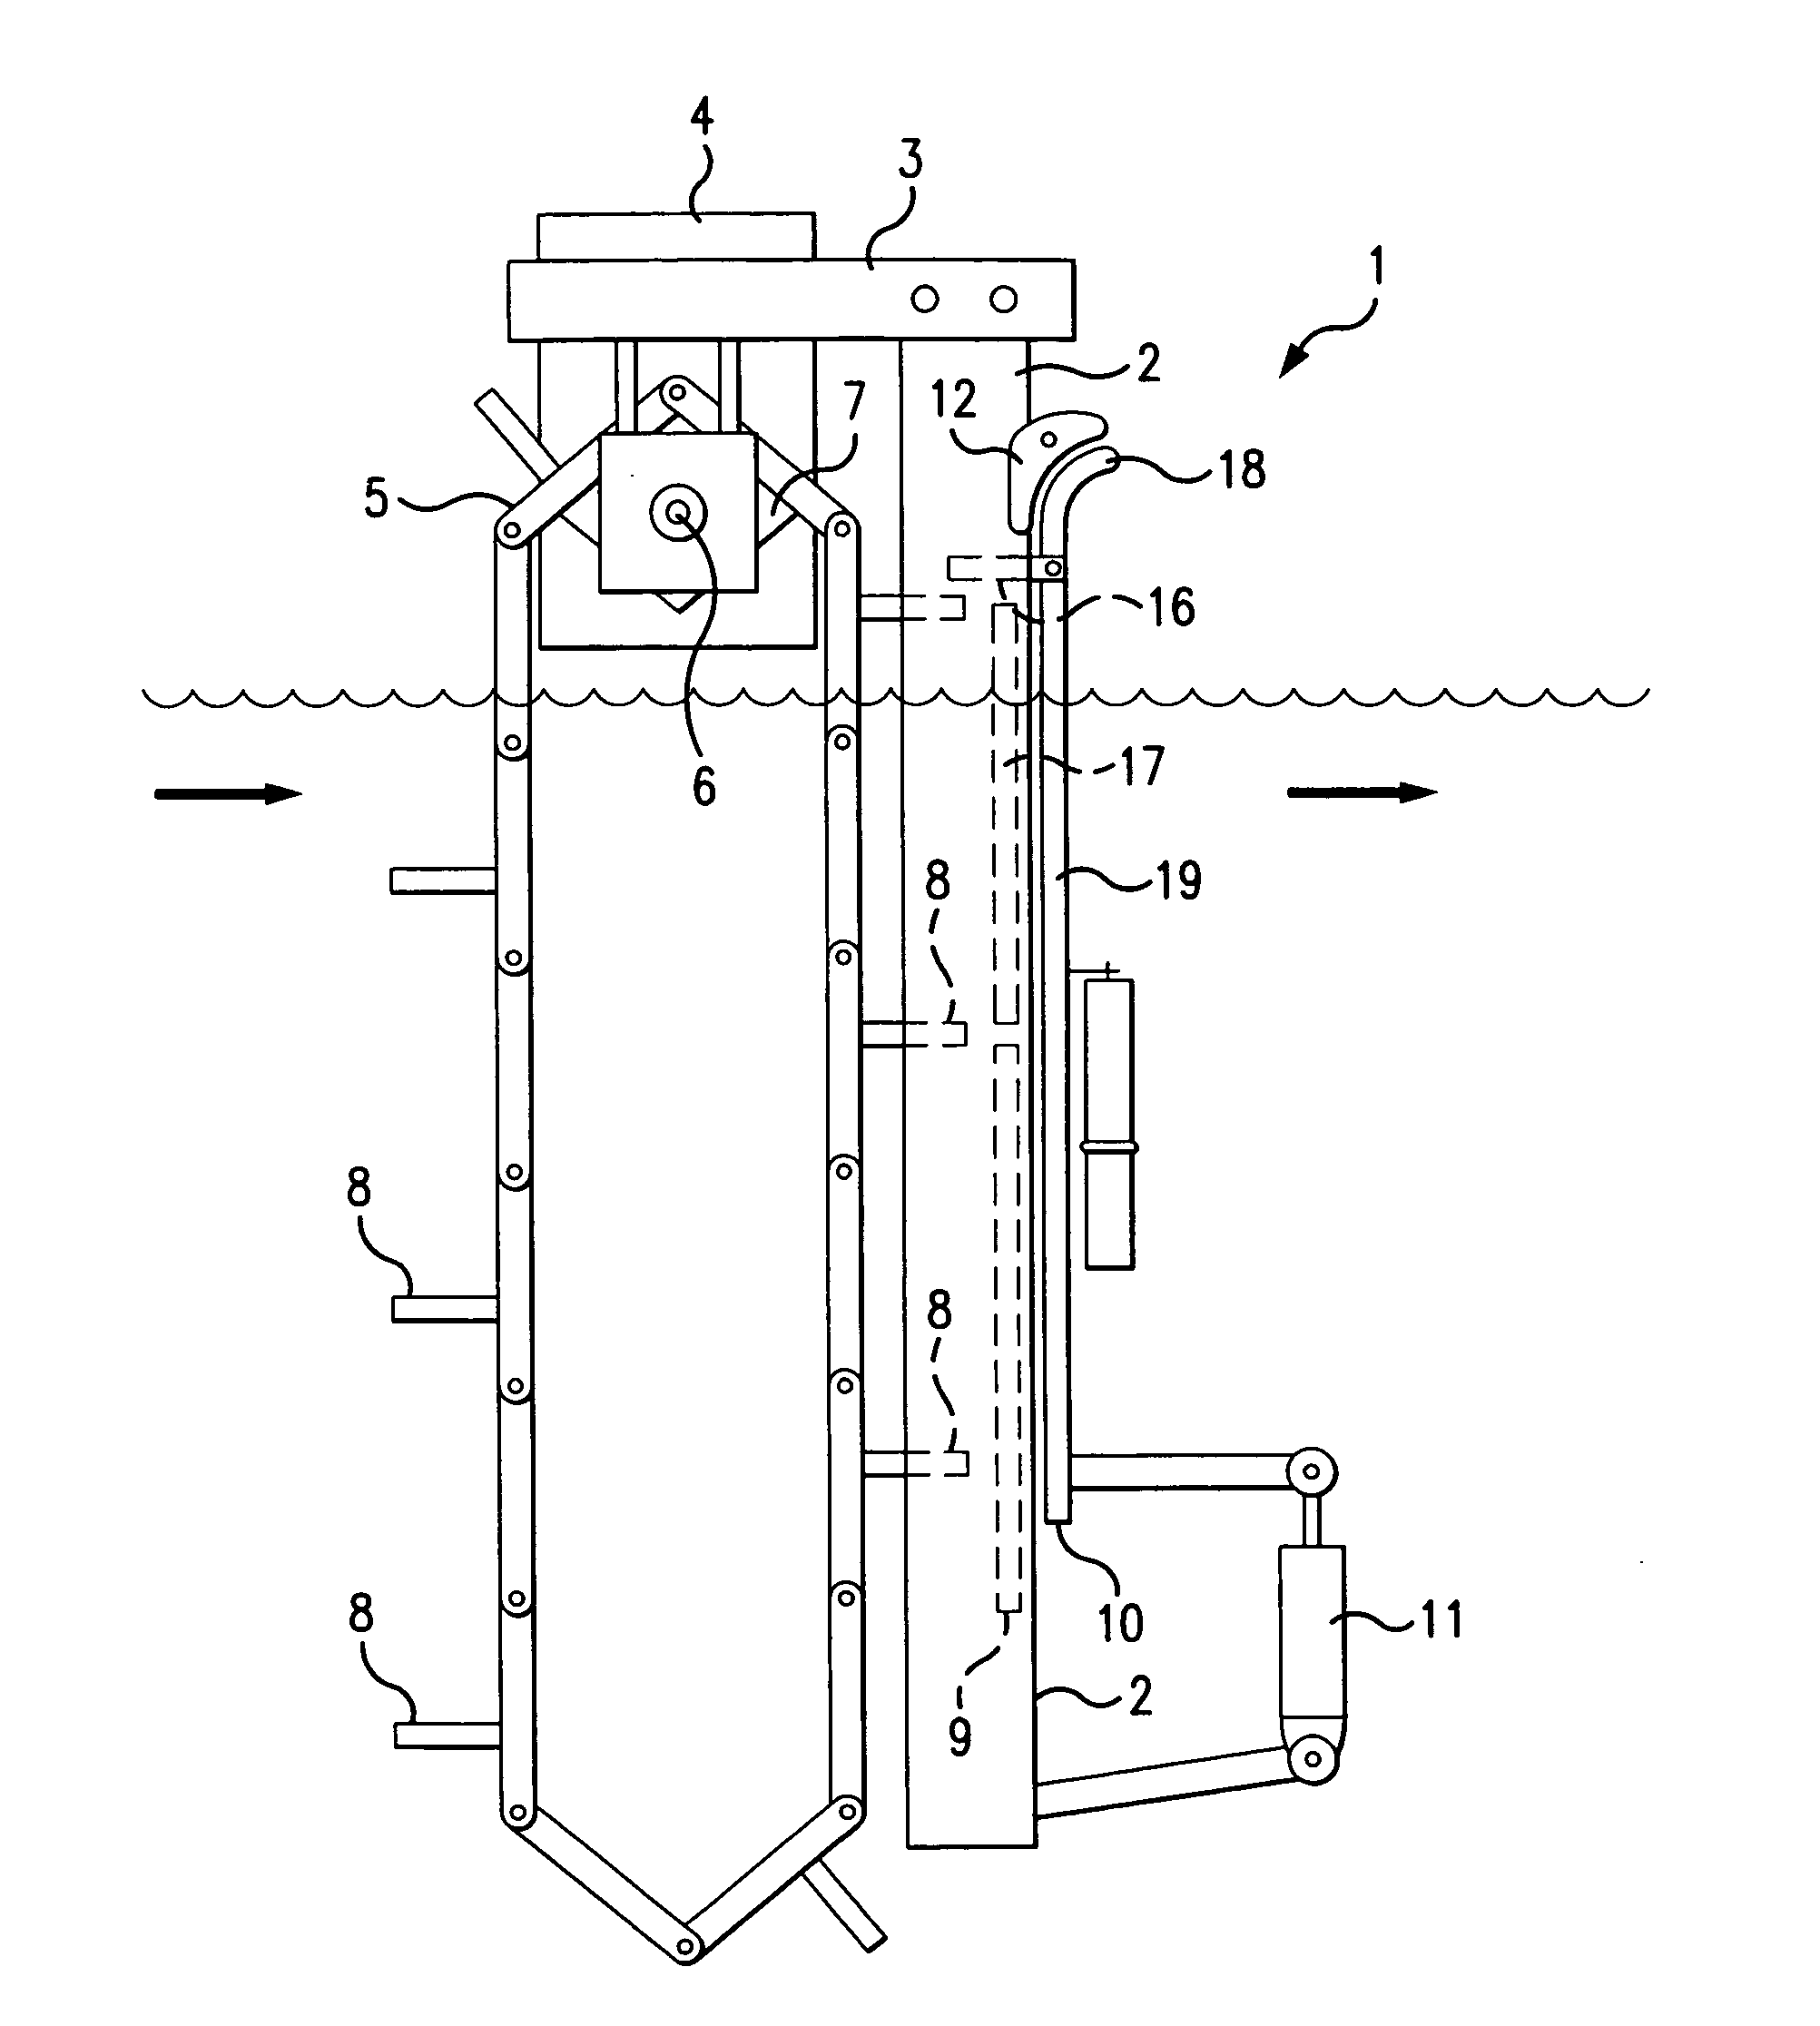 Thin plate apparatus for removing debris from water